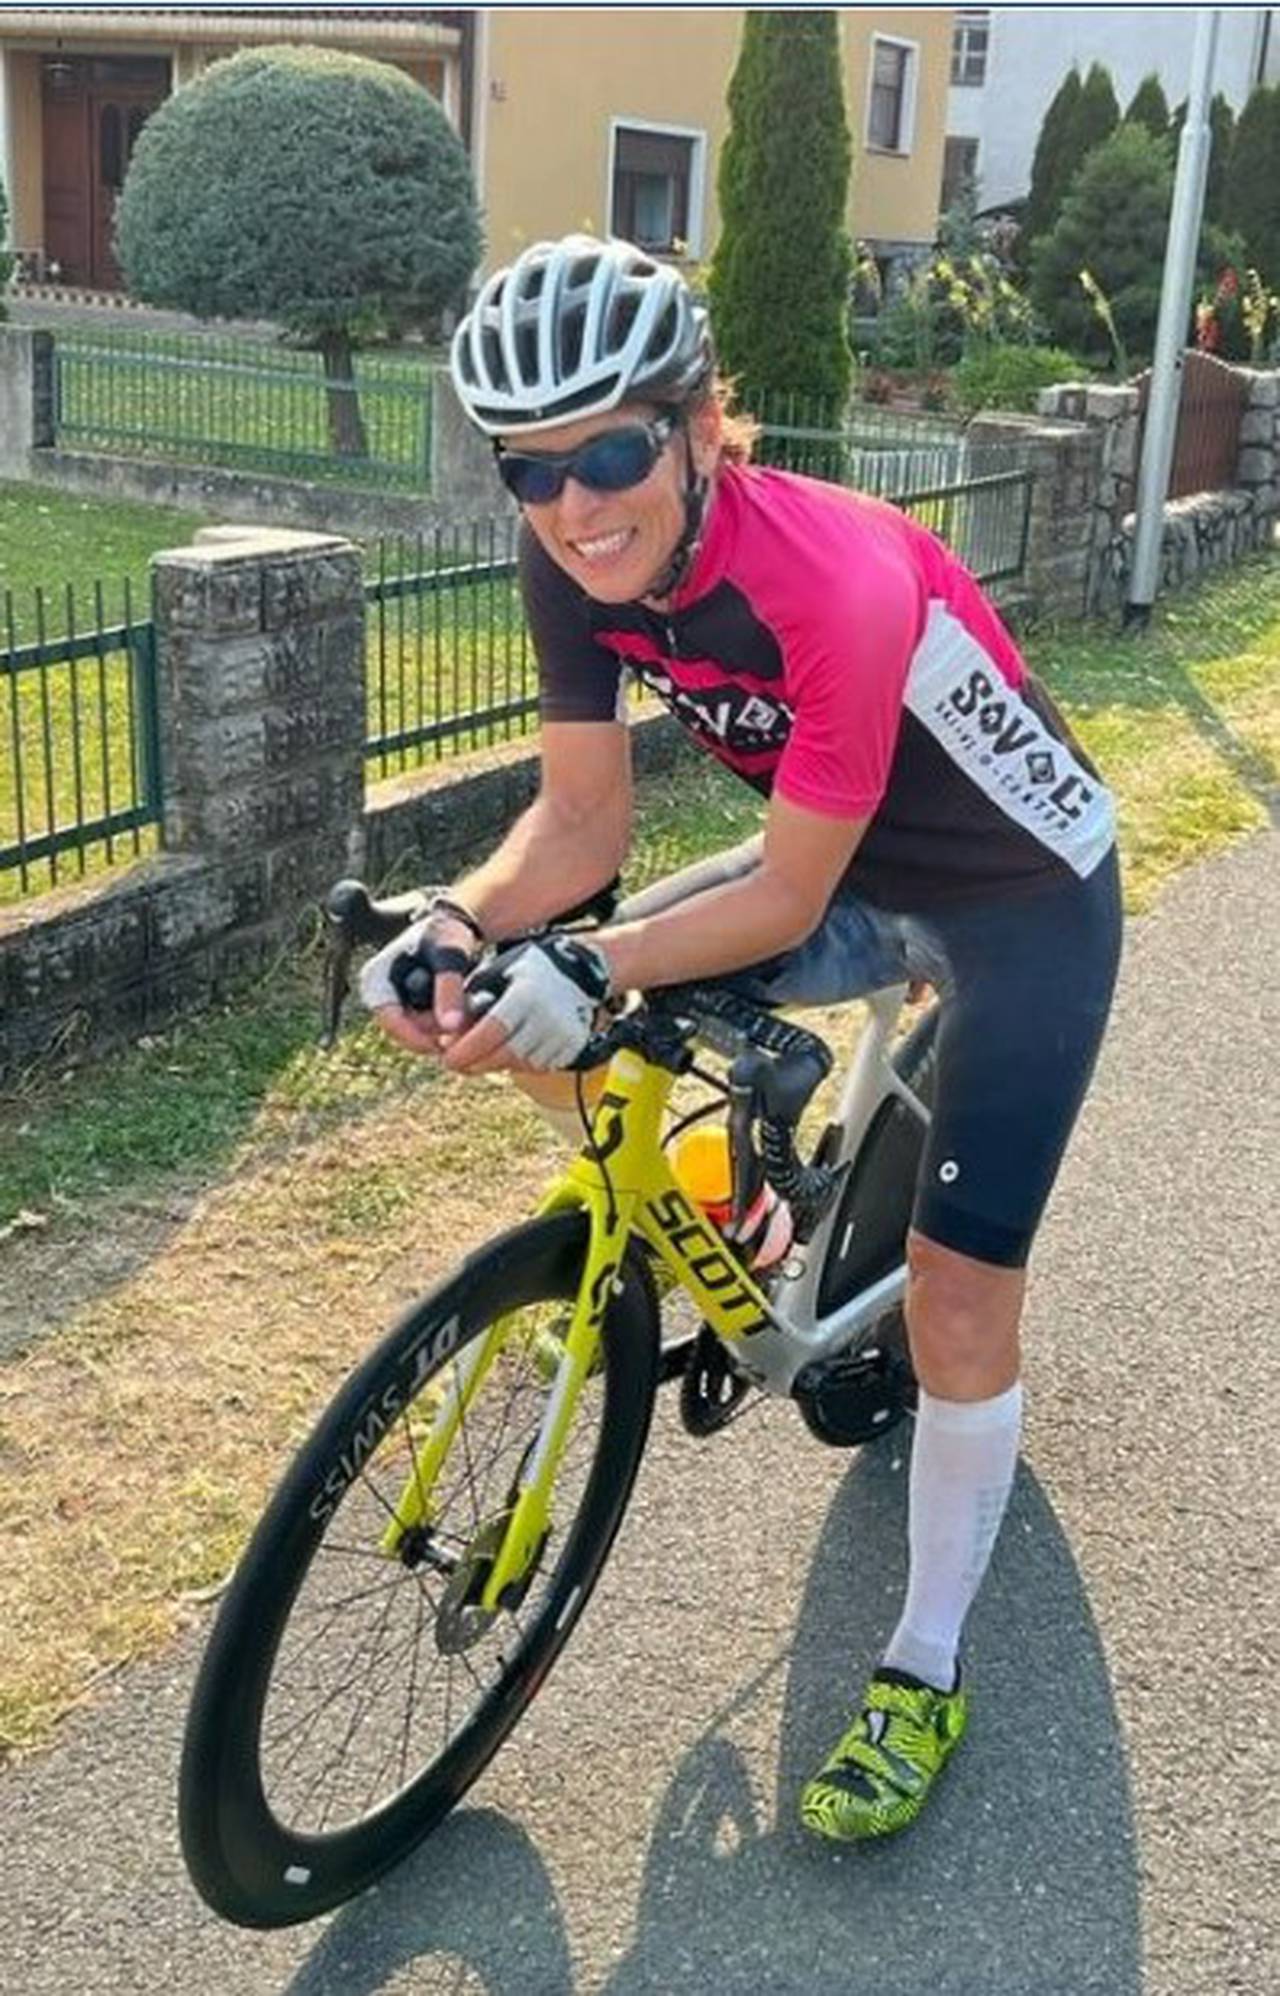 Swiss ultra cyclist Isa Pulver was in the lead Wednesday as the Race Across America reached West Virginia on the trek from Oceanside, California to Annapolis.